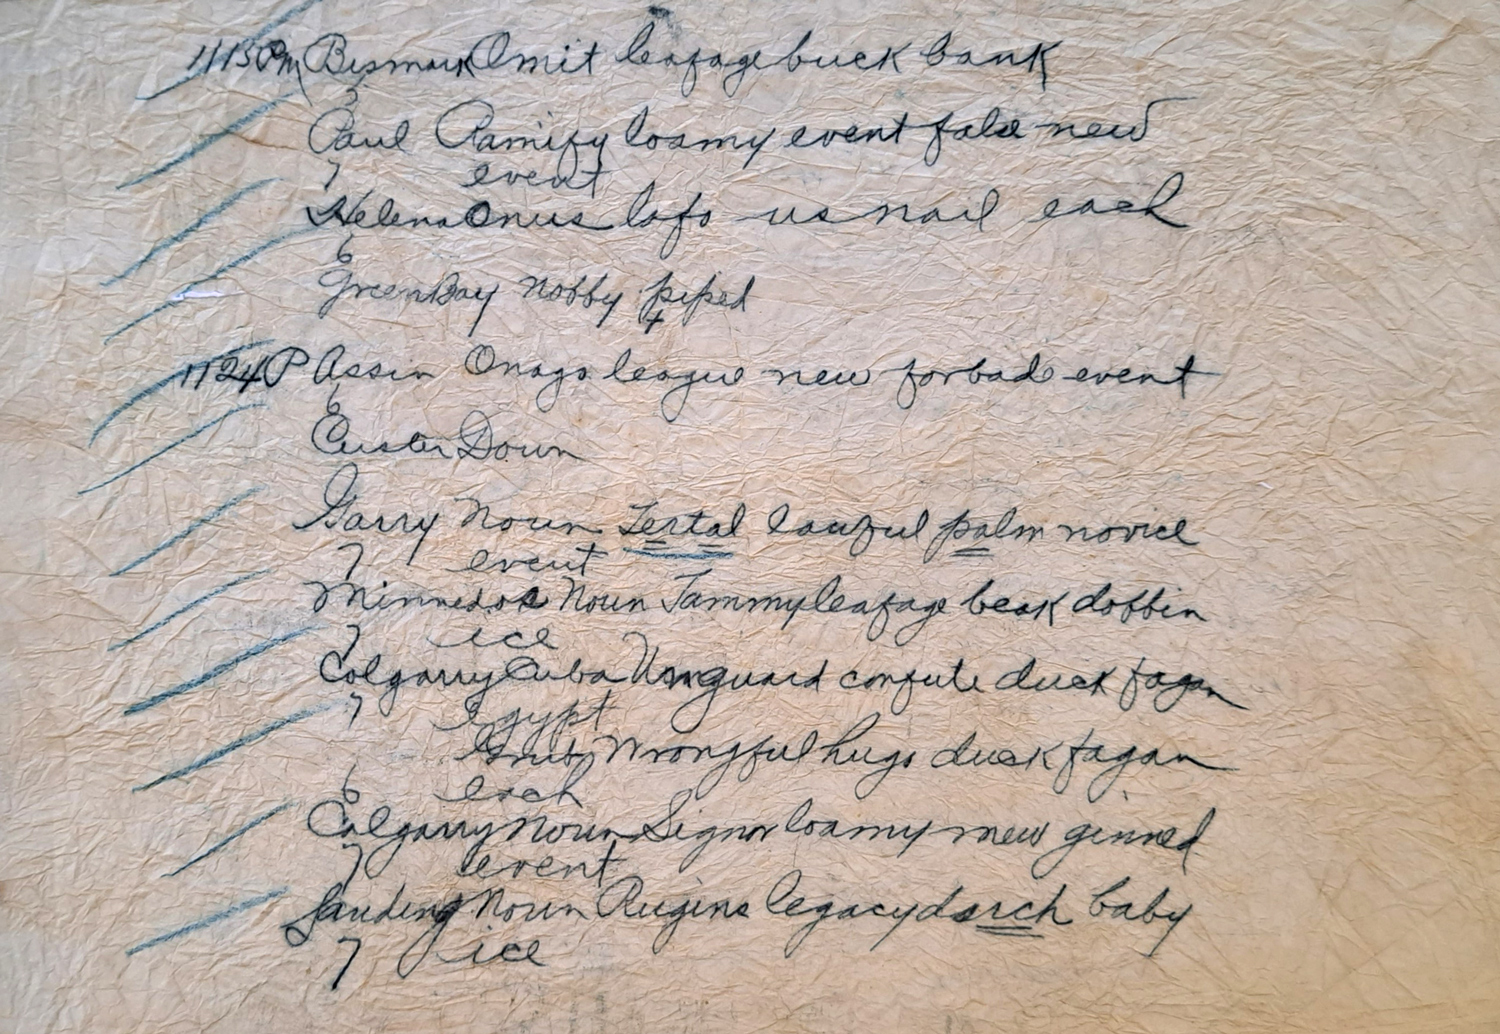 A wrinkled piece of paper with several handwritten lines.